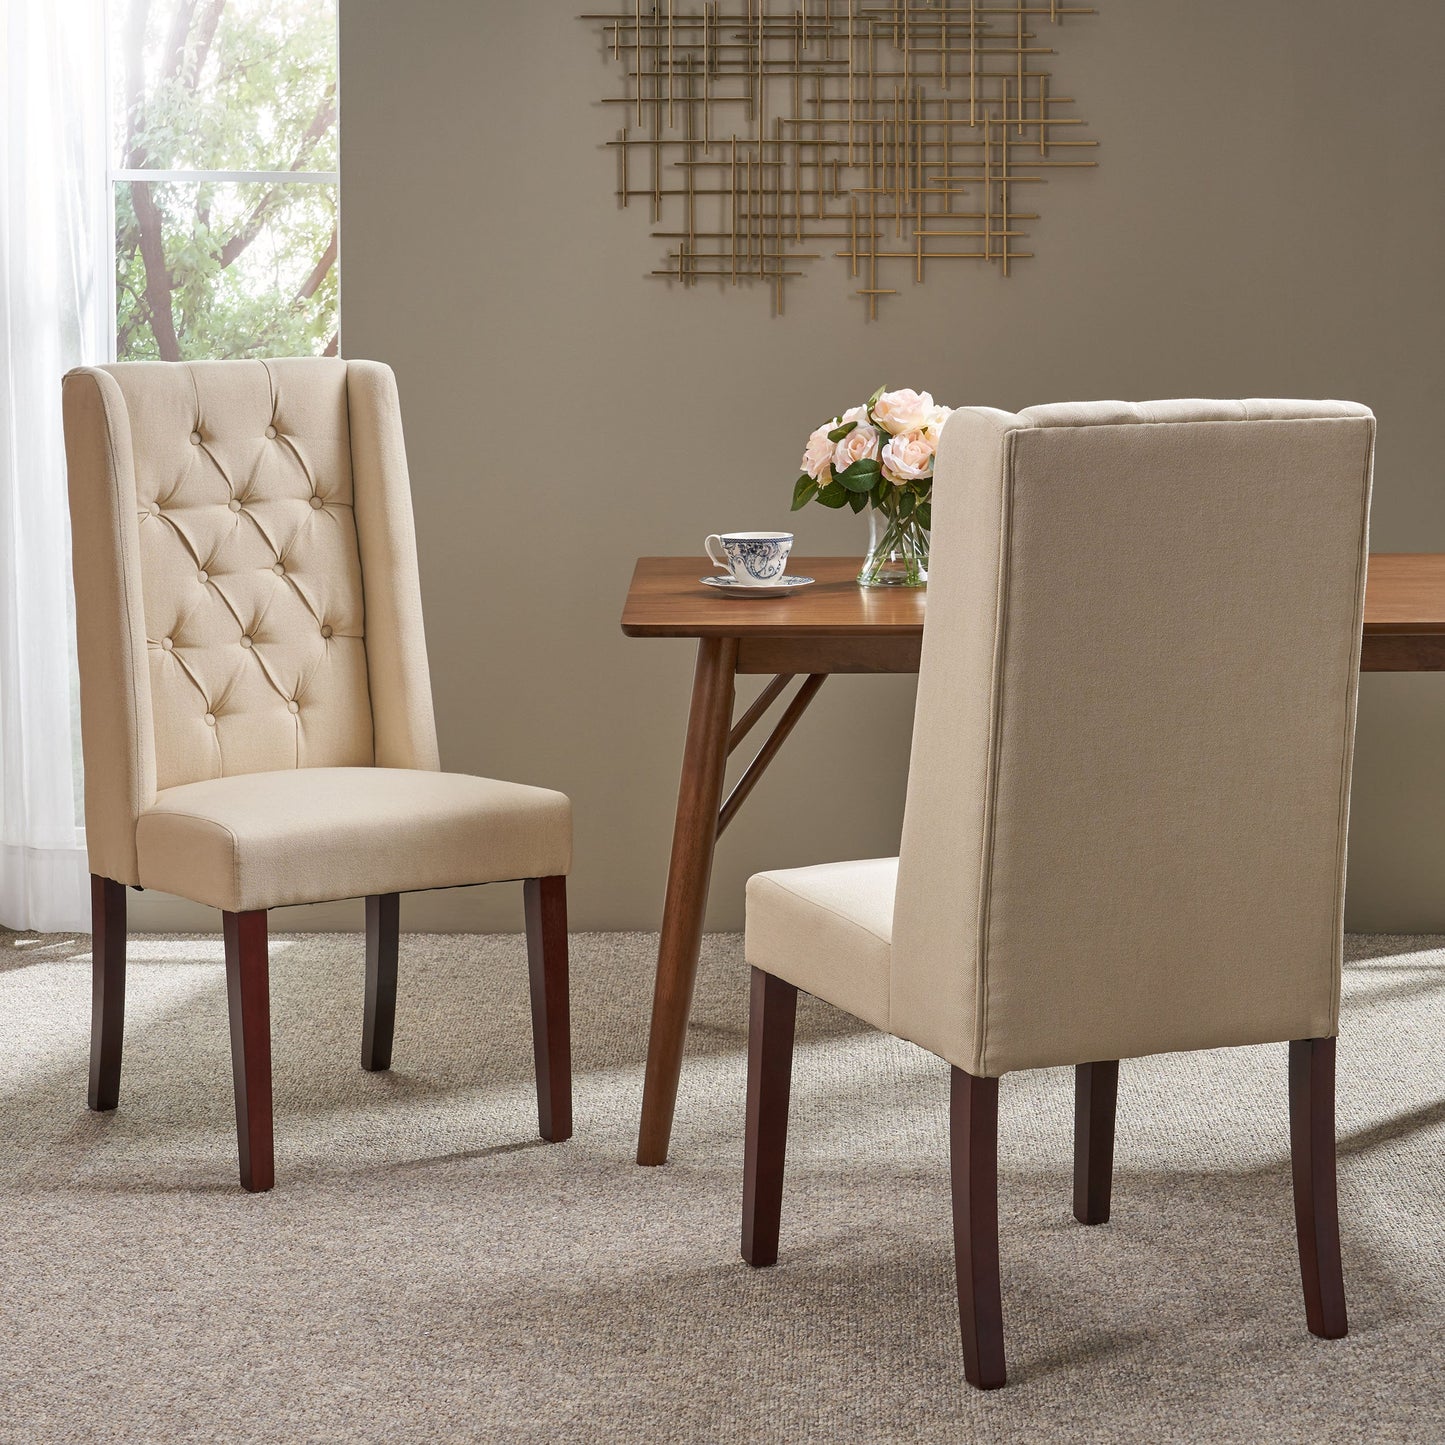 Billings Tufted Fabric High Back Dining Chairs (Set of 2)